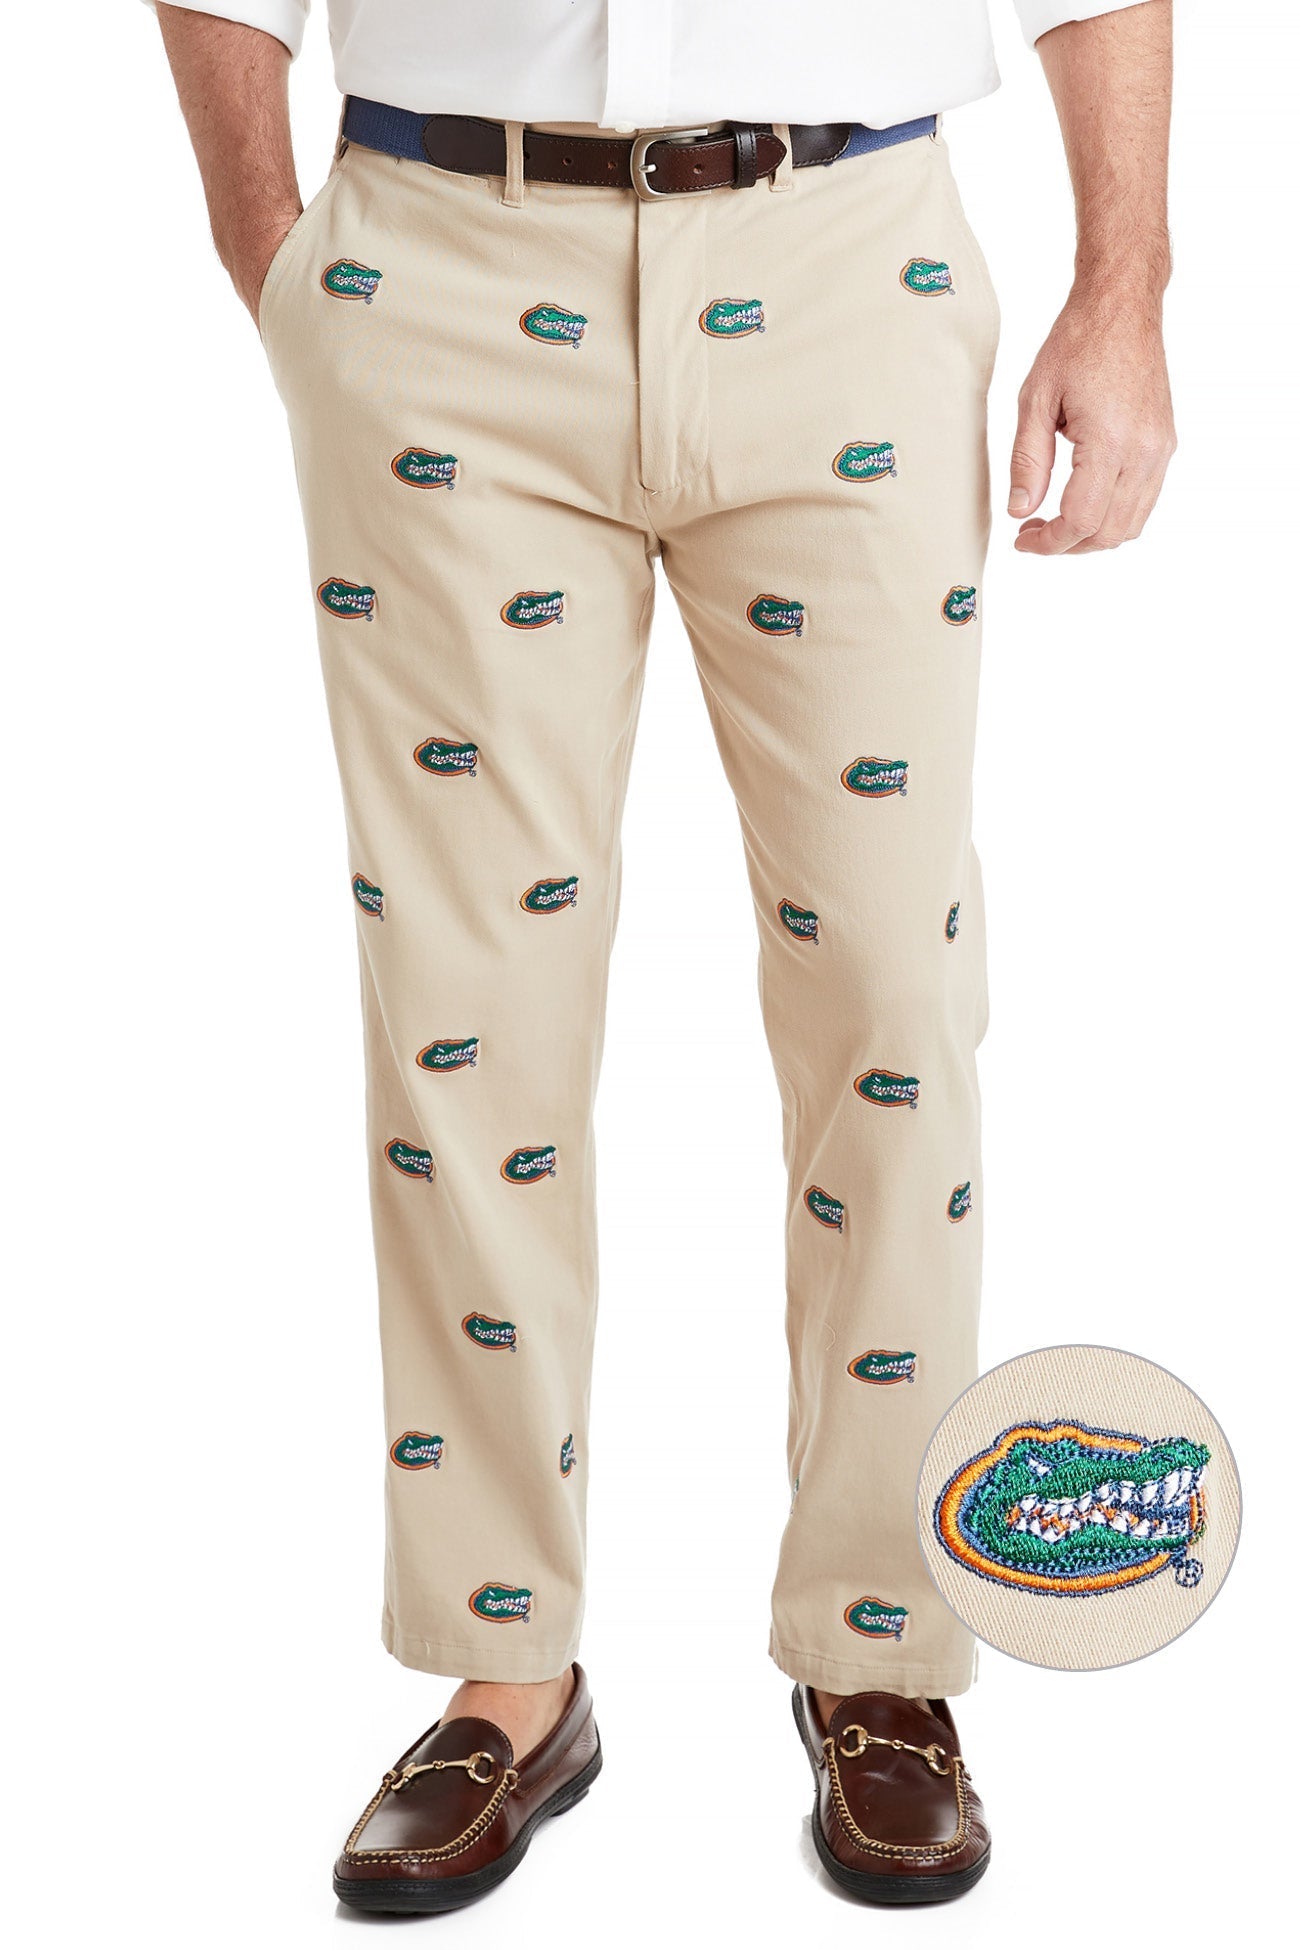 Collegiate Stretch Twill Pant Khaki with University of Florida Gators MENS EMBROIDERED PANTS Castaway Nantucket Island